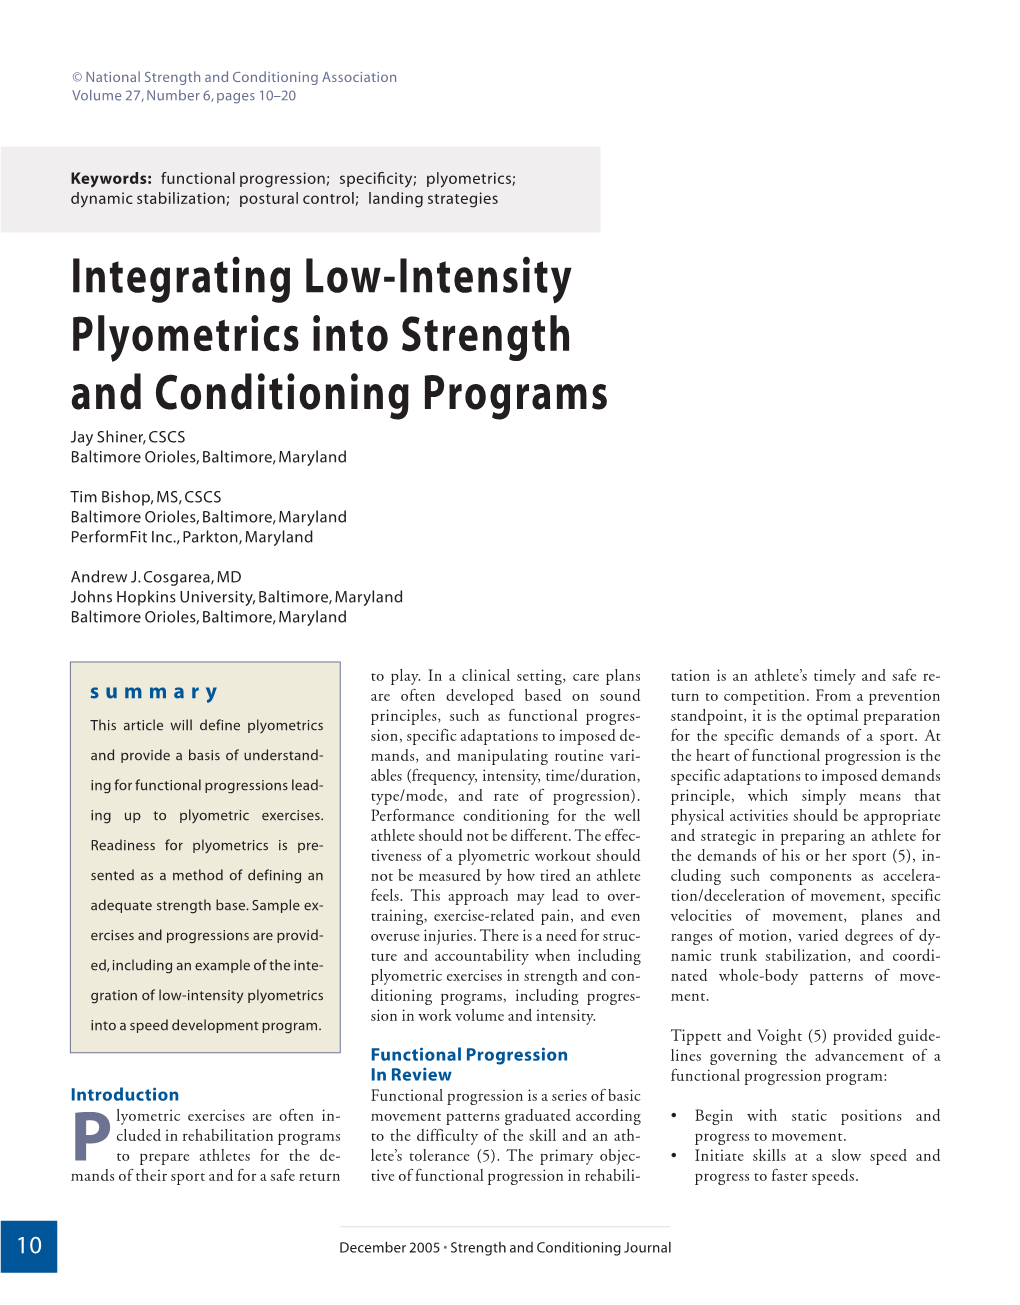 Integrating Low-Intensity Plyometrics Into Strength and Conditioning Programs Jay Shiner,CSCS Baltimore Orioles,Baltimore,Maryland